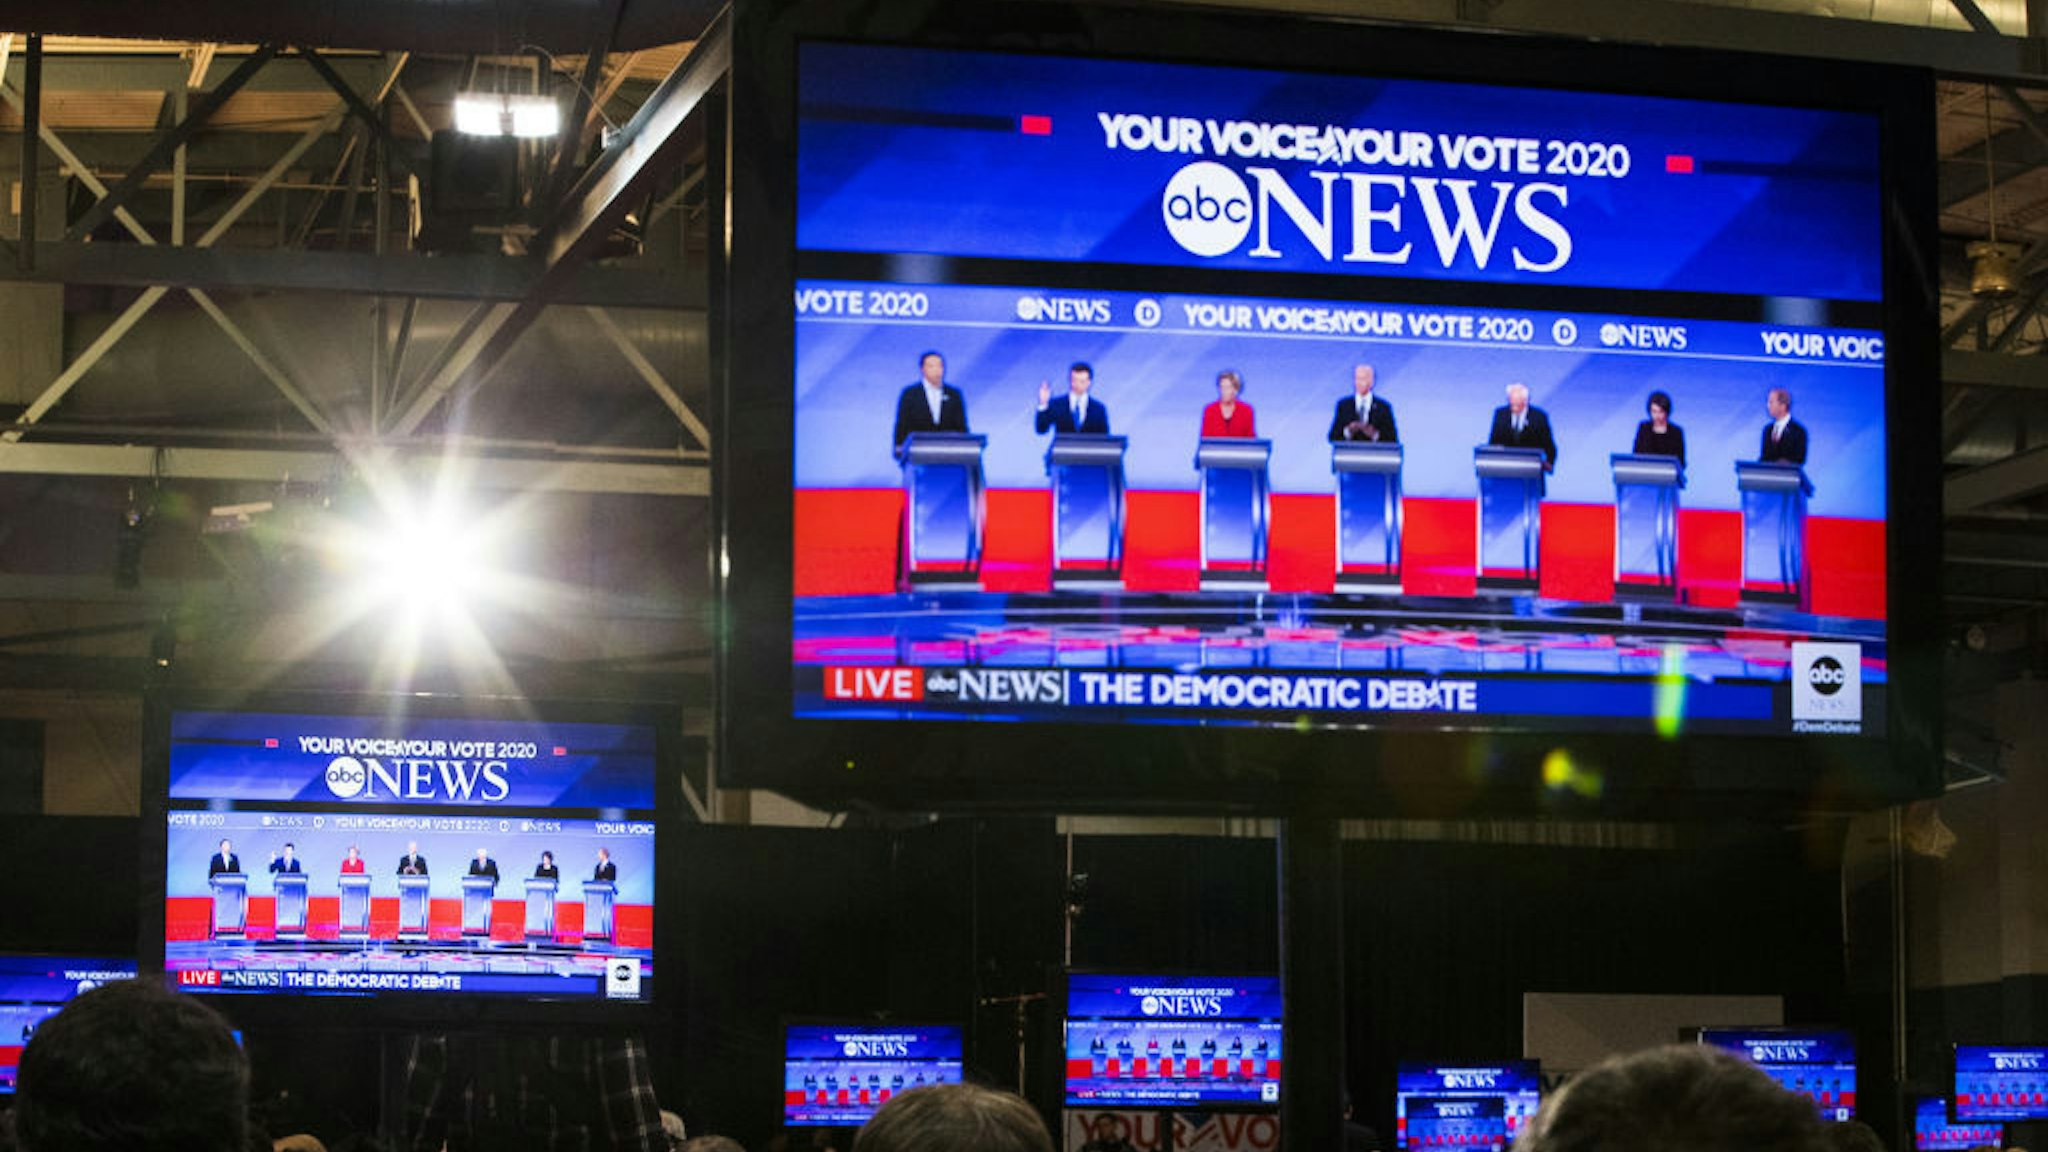 2020 Democratic presidential candidates are seen on television screens in the spin room during the Democratic presidential debate at Saint Anselm College in Manchester, New Hampshire, U.S., on Friday, Feb. 7, 2020. The New Hampshire debates often mark a turning point in a presidential campaign, as the field of candidates is winnowed and voters begin to pay closer attention. Photographer: Adam Glanzman/Bloomberg